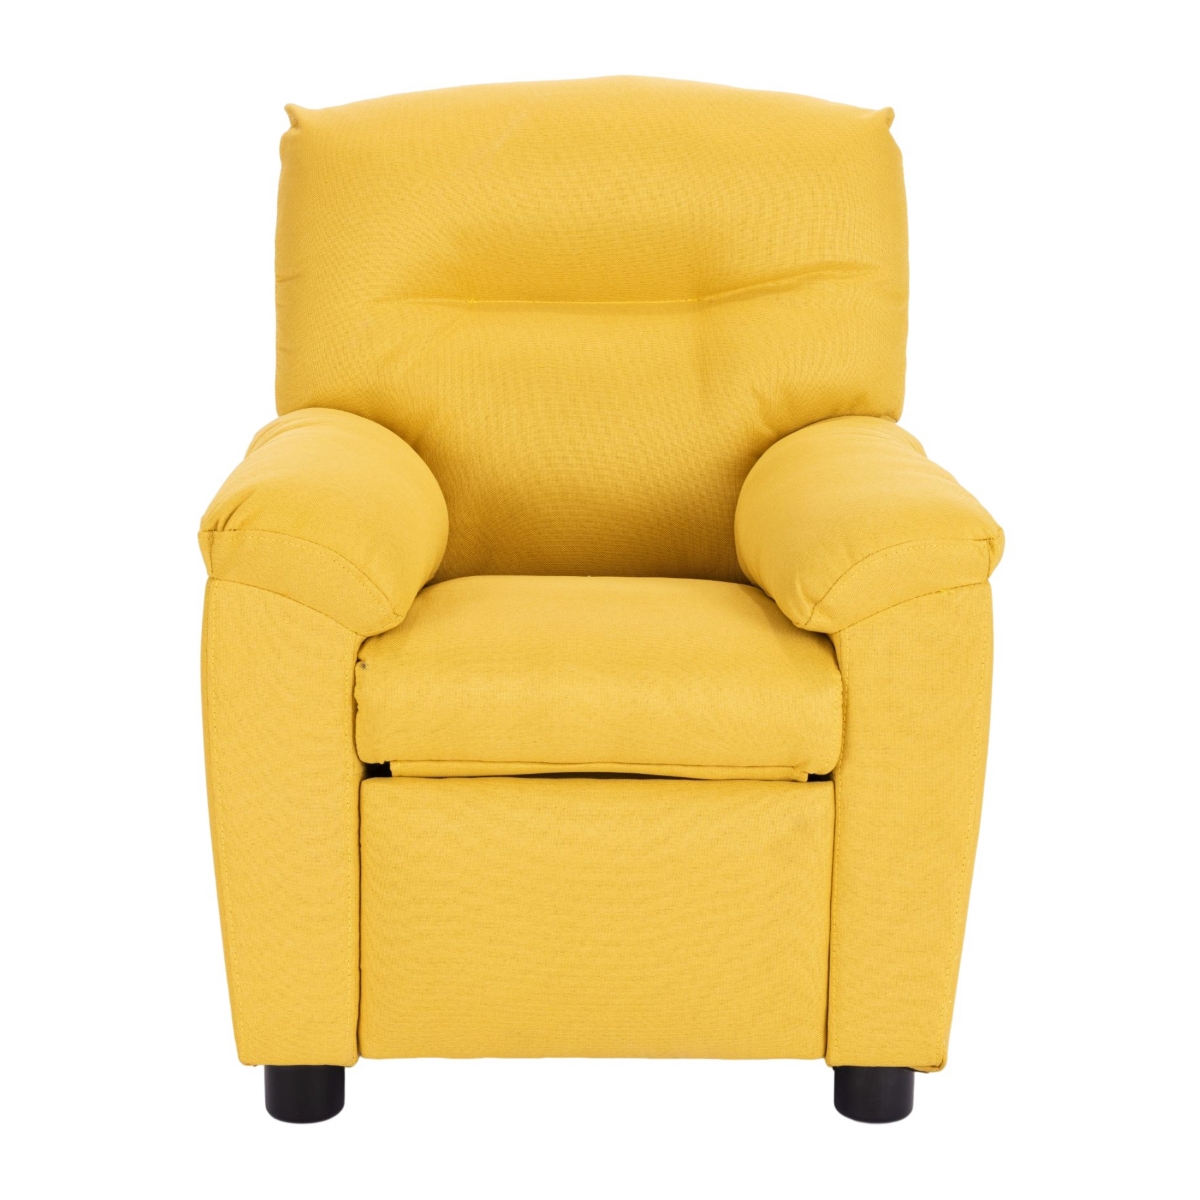 Fc Design Tufted Back Kids Recliner Sofa Chair With Pillow Top Armrest And Footrest In Yellow